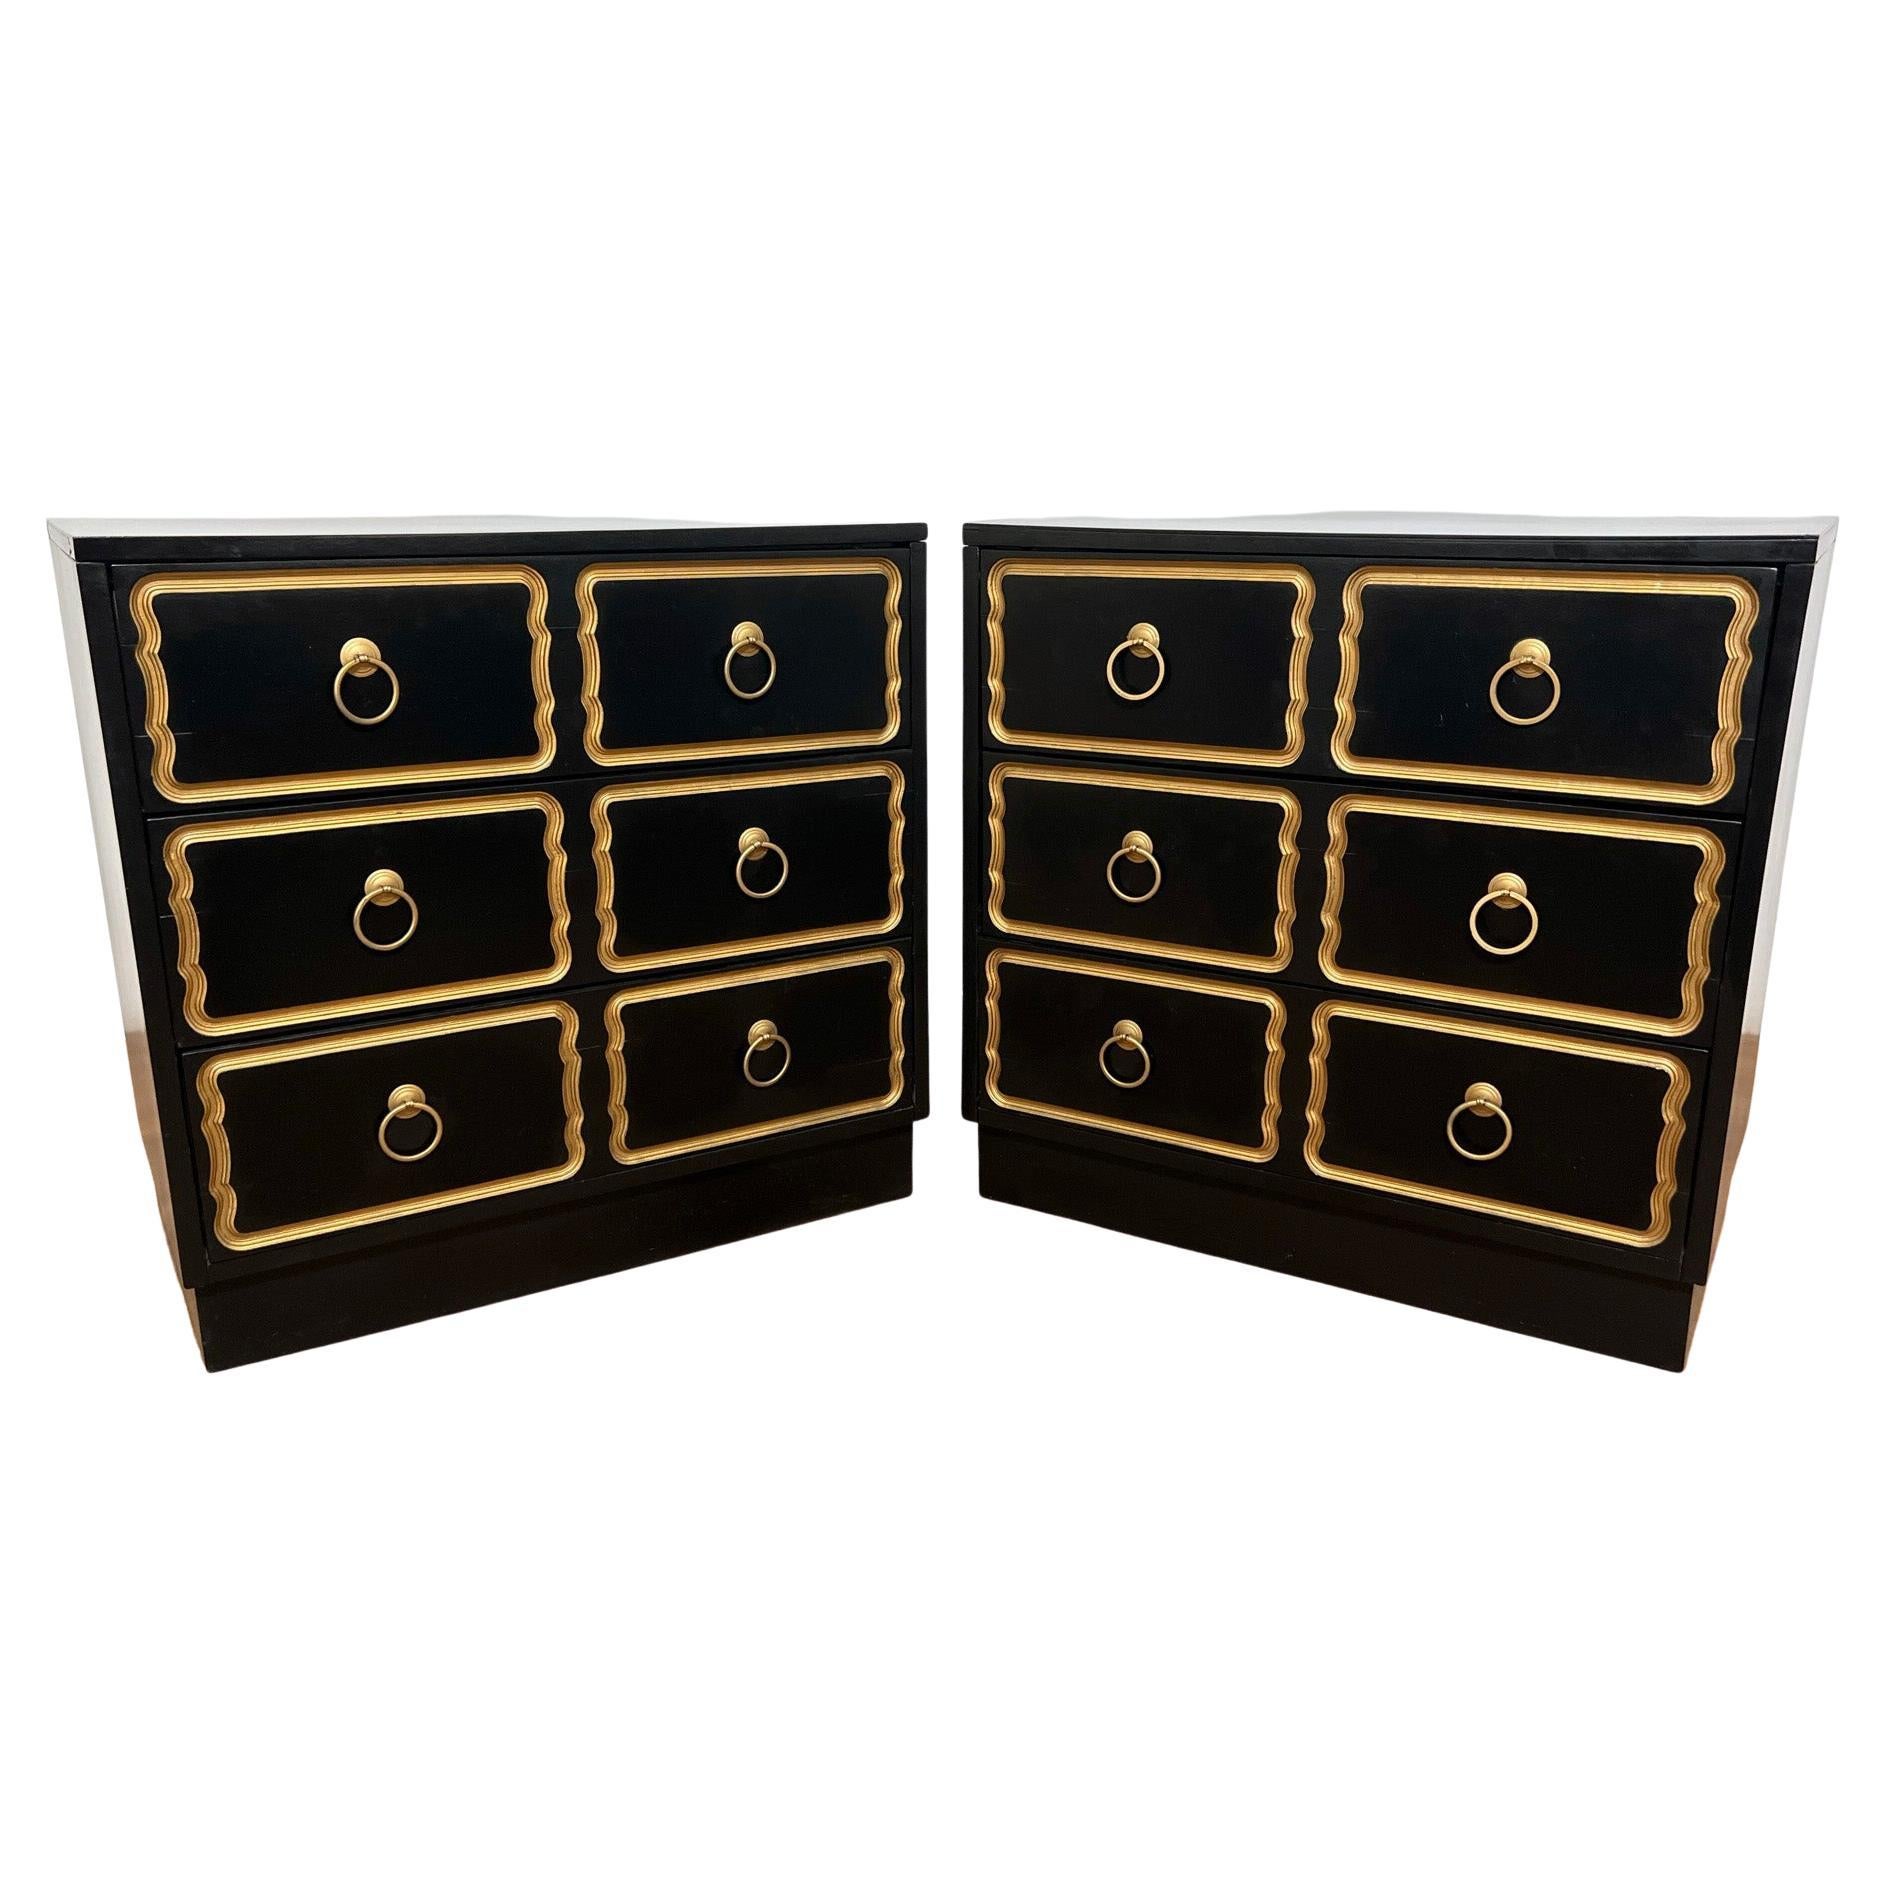 Pair of "Espana" Chests in the Manner of Dorothy Draper, circa 1950s